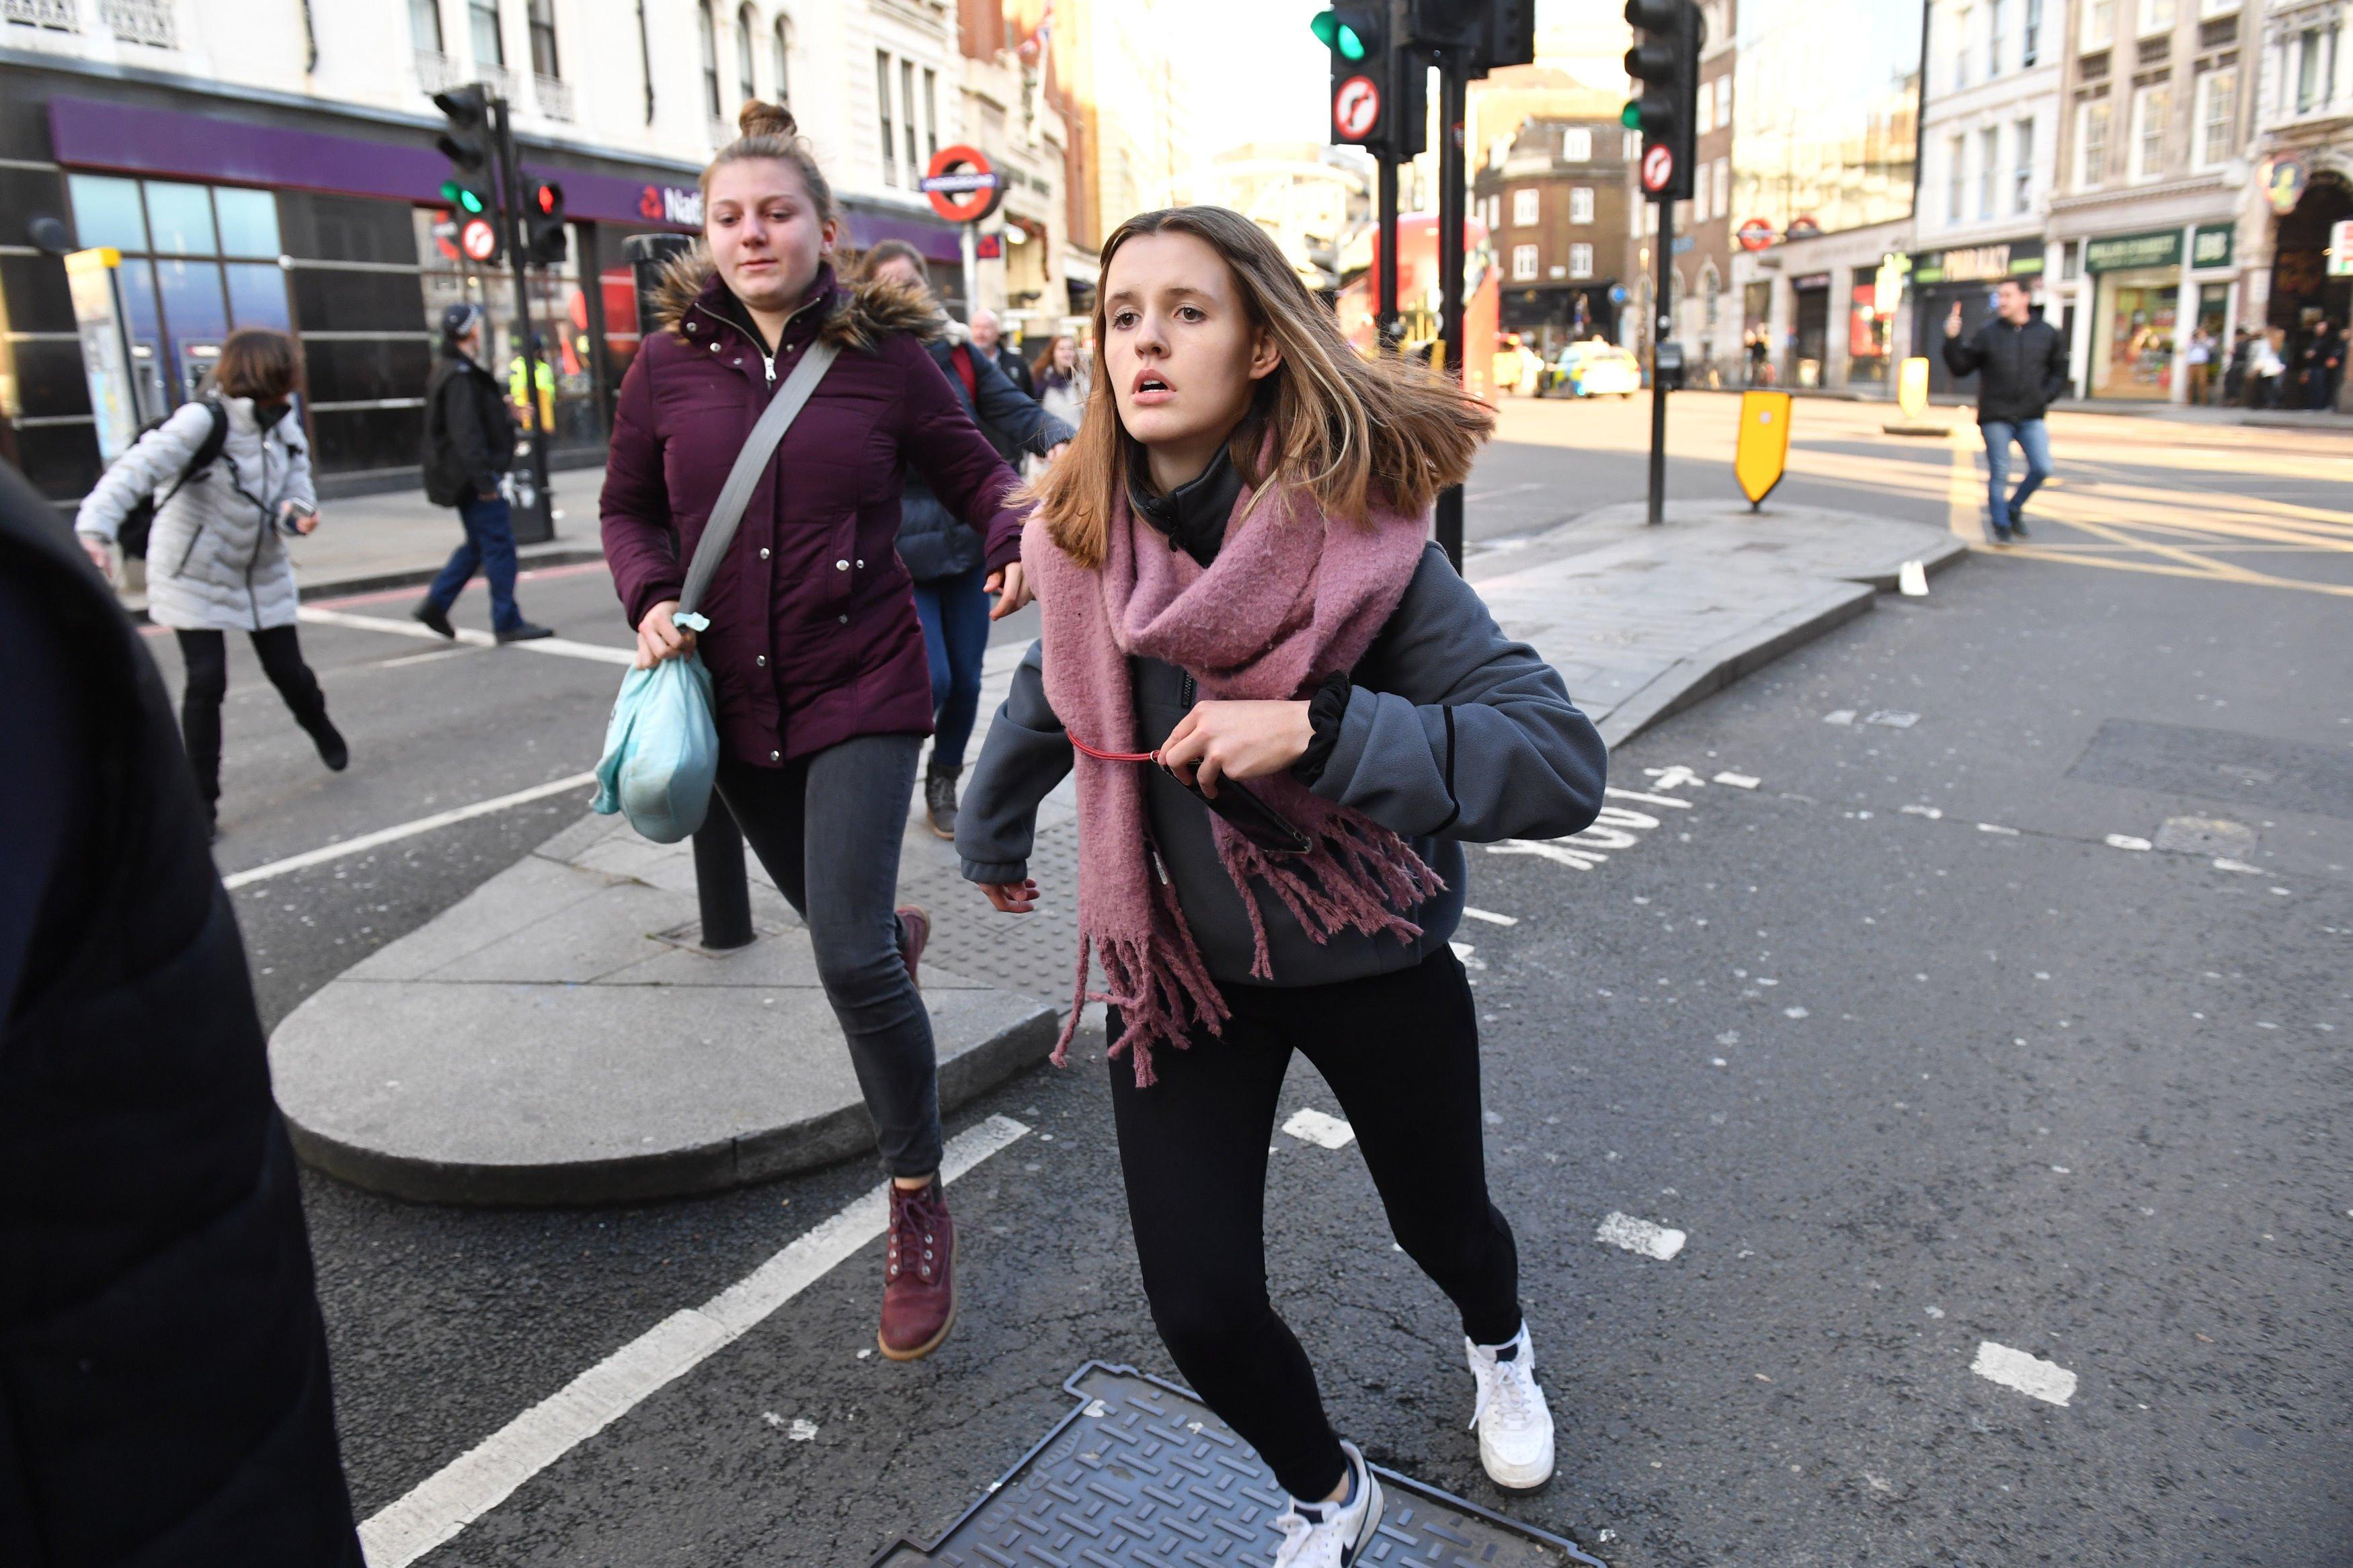 People fleeing from Borough Market, central London following a police incident. PA Photo